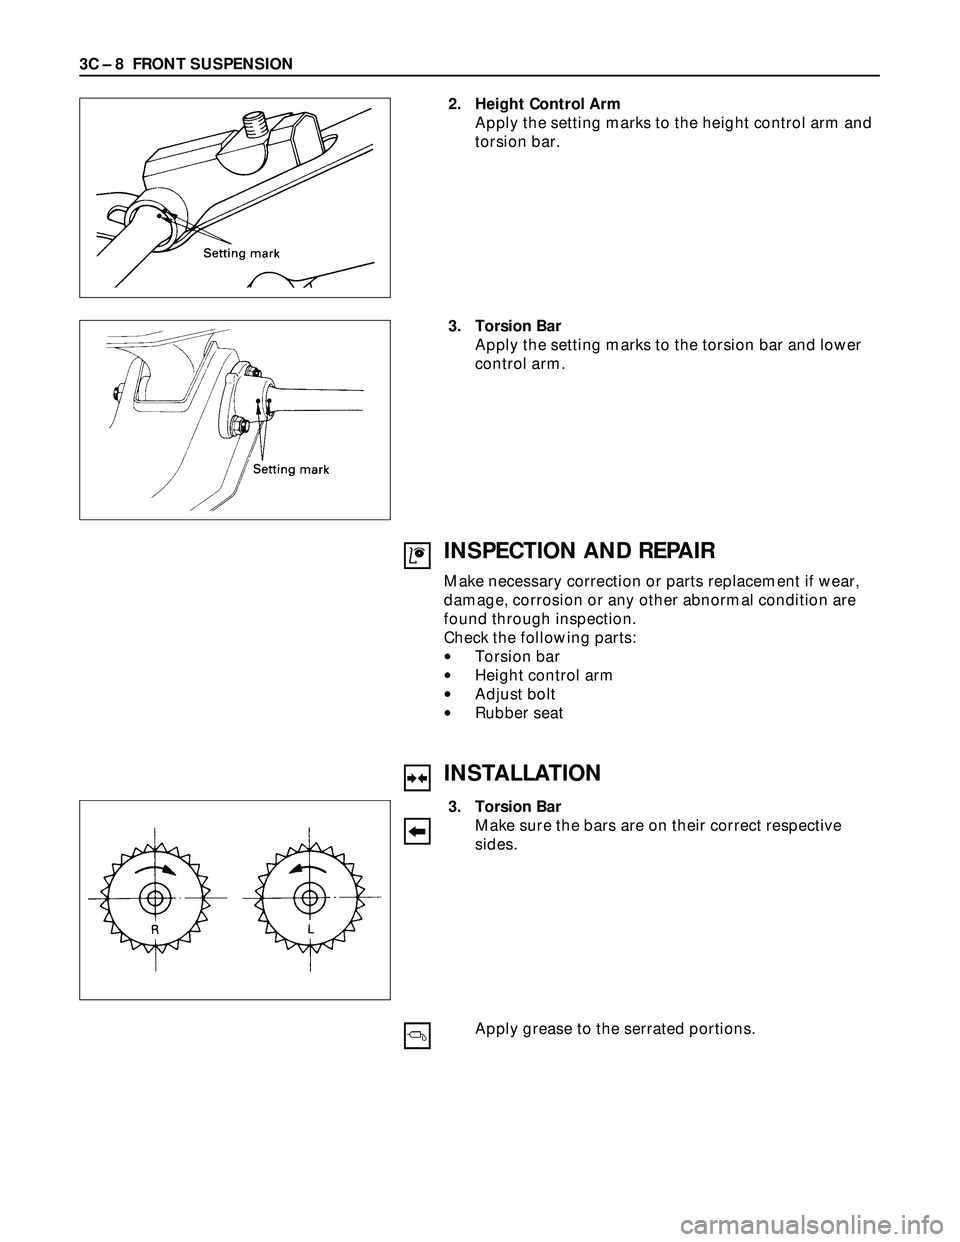 ISUZU TROOPER 1998  Service Repair Manual 3C – 8 FRONT SUSPENSION
2. Height Control Arm
Apply the setting marks to the height control arm and
torsion bar.
3. Torsion Bar
Apply the setting marks to the torsion bar and lower
control arm.
INSP